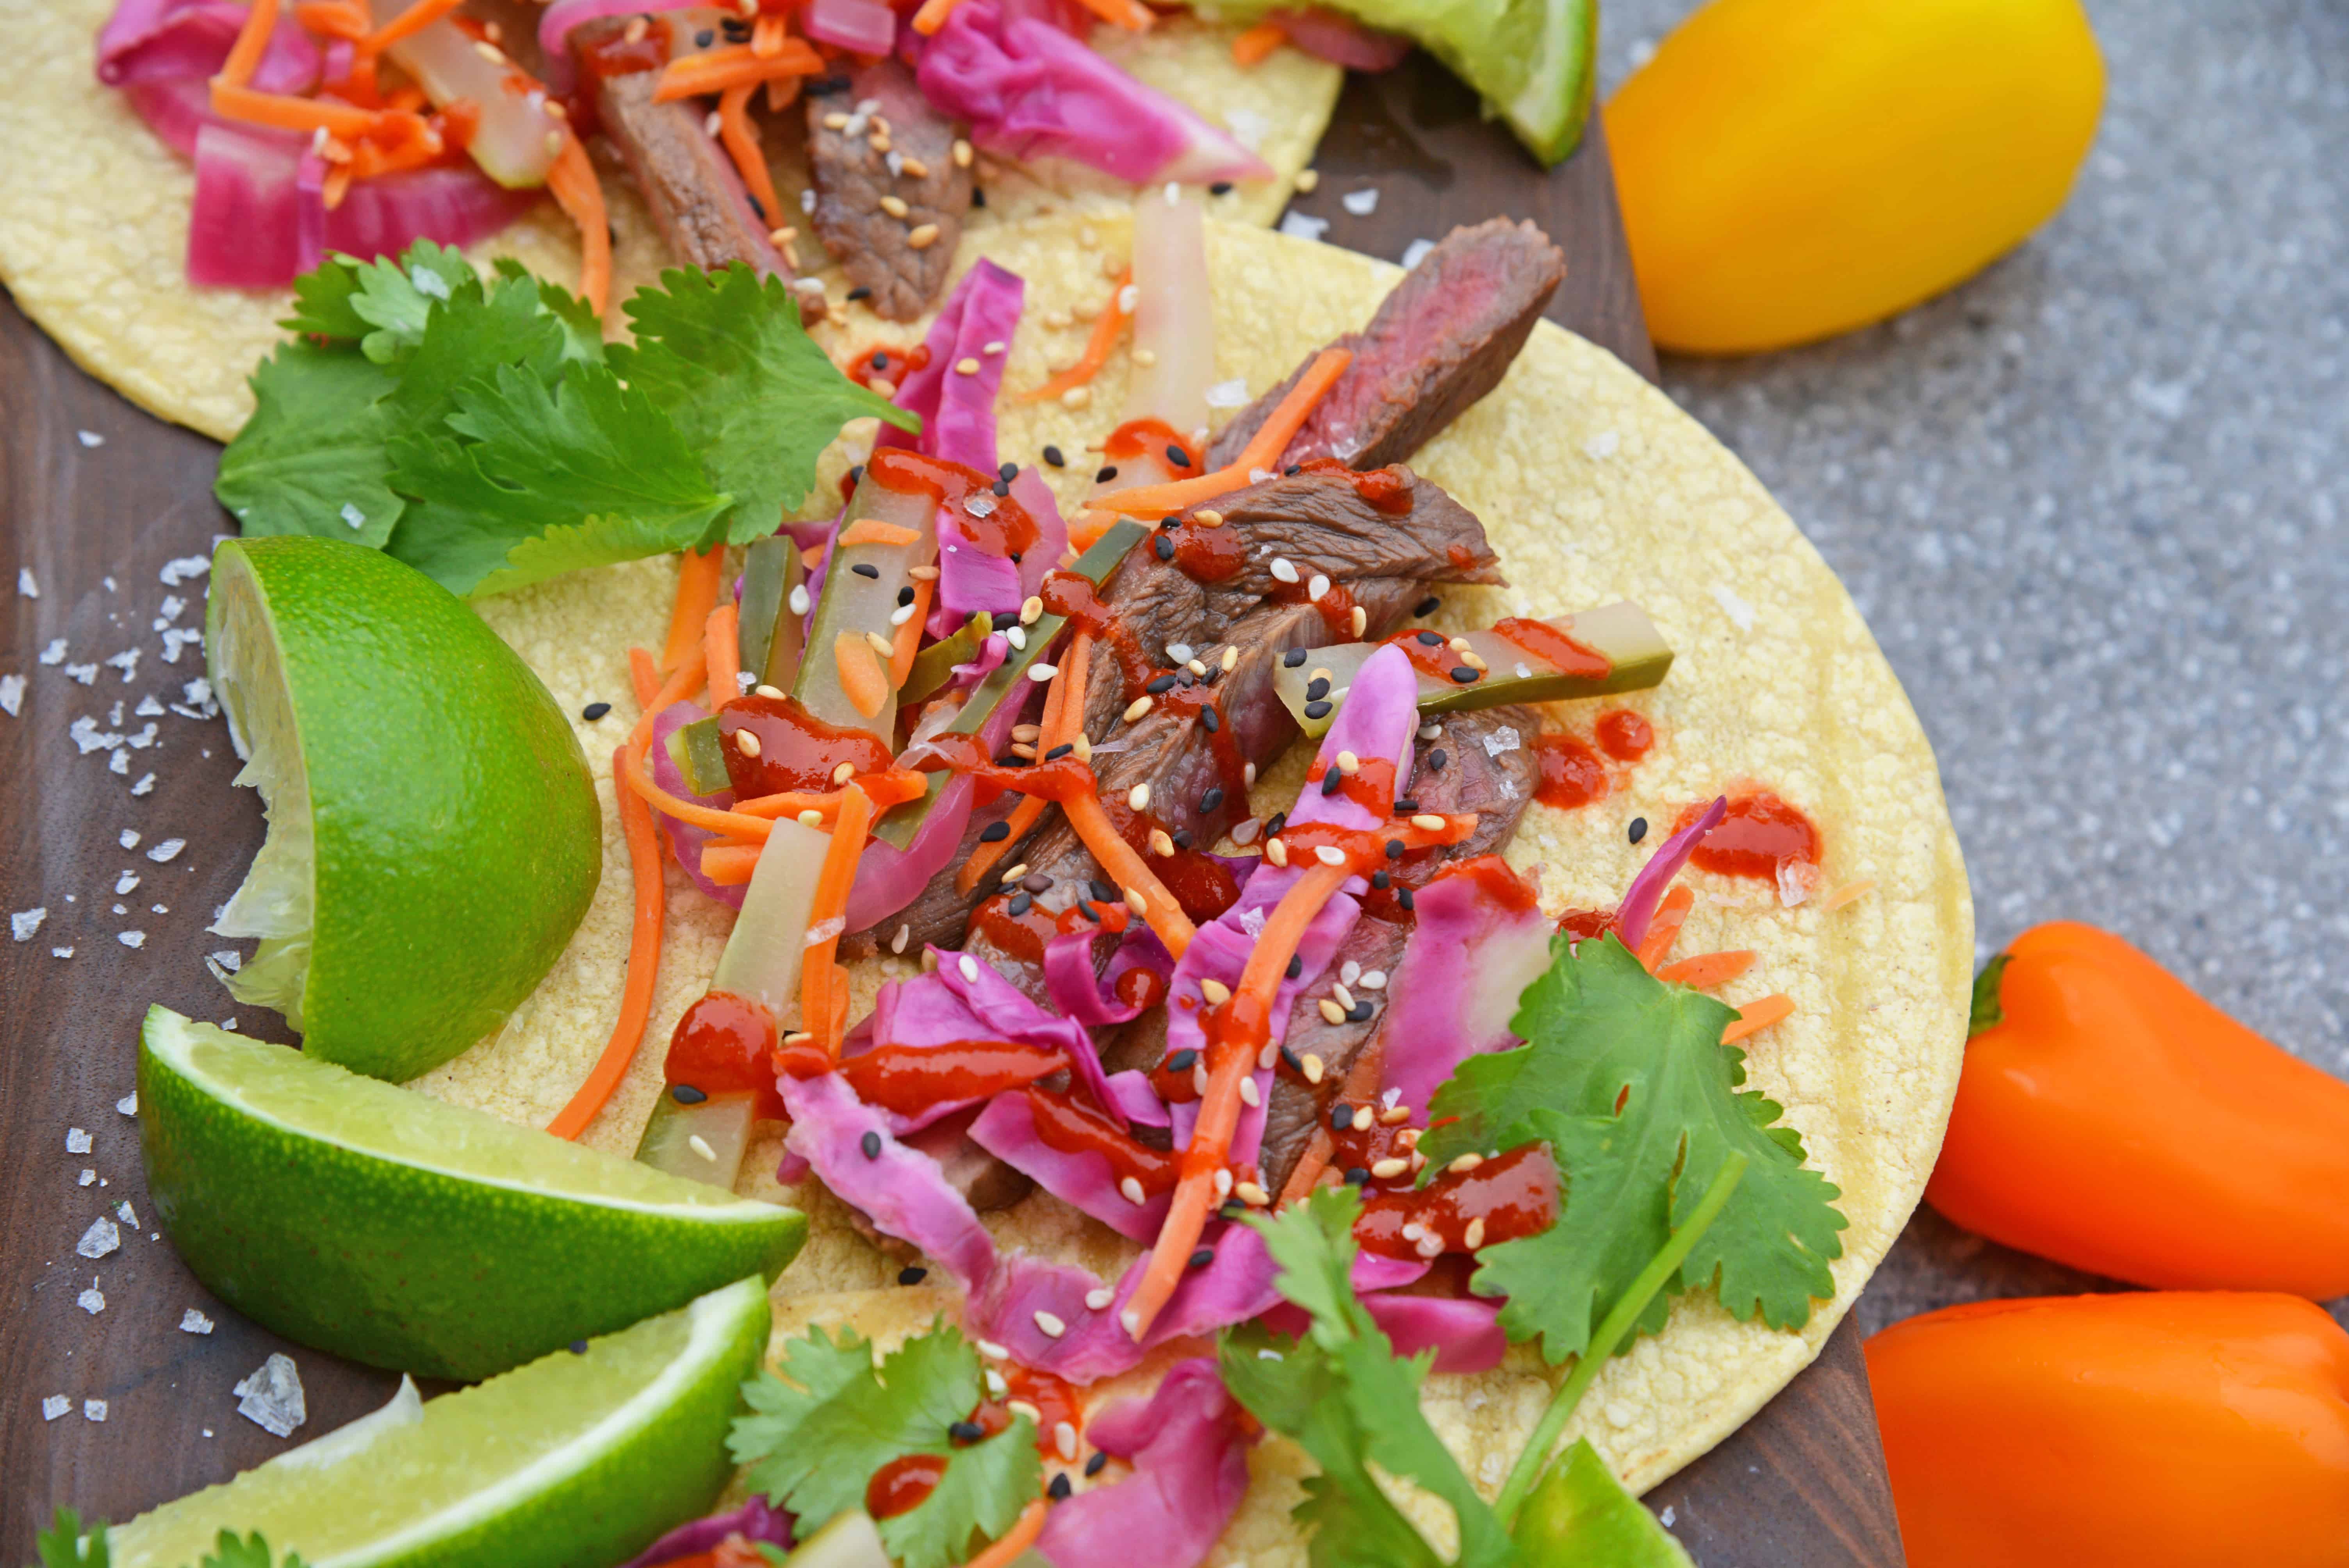 Korean Beef Tacos are stuffed with seasoned bulgogi beef, fresh veggies, and spicy sauce! These are the best Korean tacos you will ever eat! Easy and tasty! #Koreanbeeftacos #bulgogitacos www.savoryexperiments.com